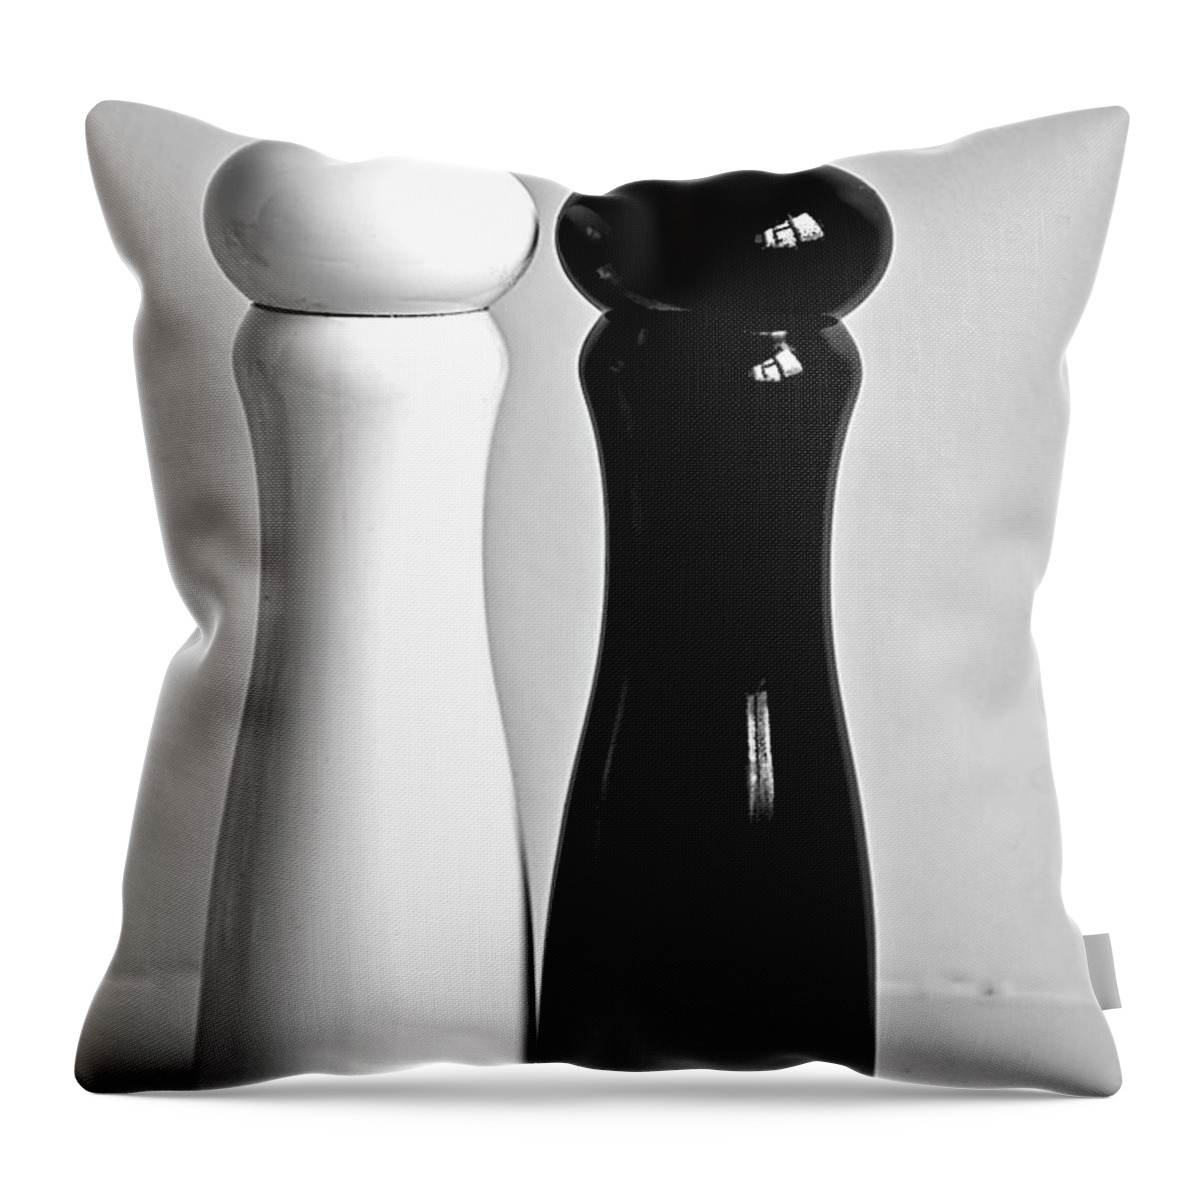 Black Color Throw Pillow featuring the photograph Salt & Pepper by Daniela White Images